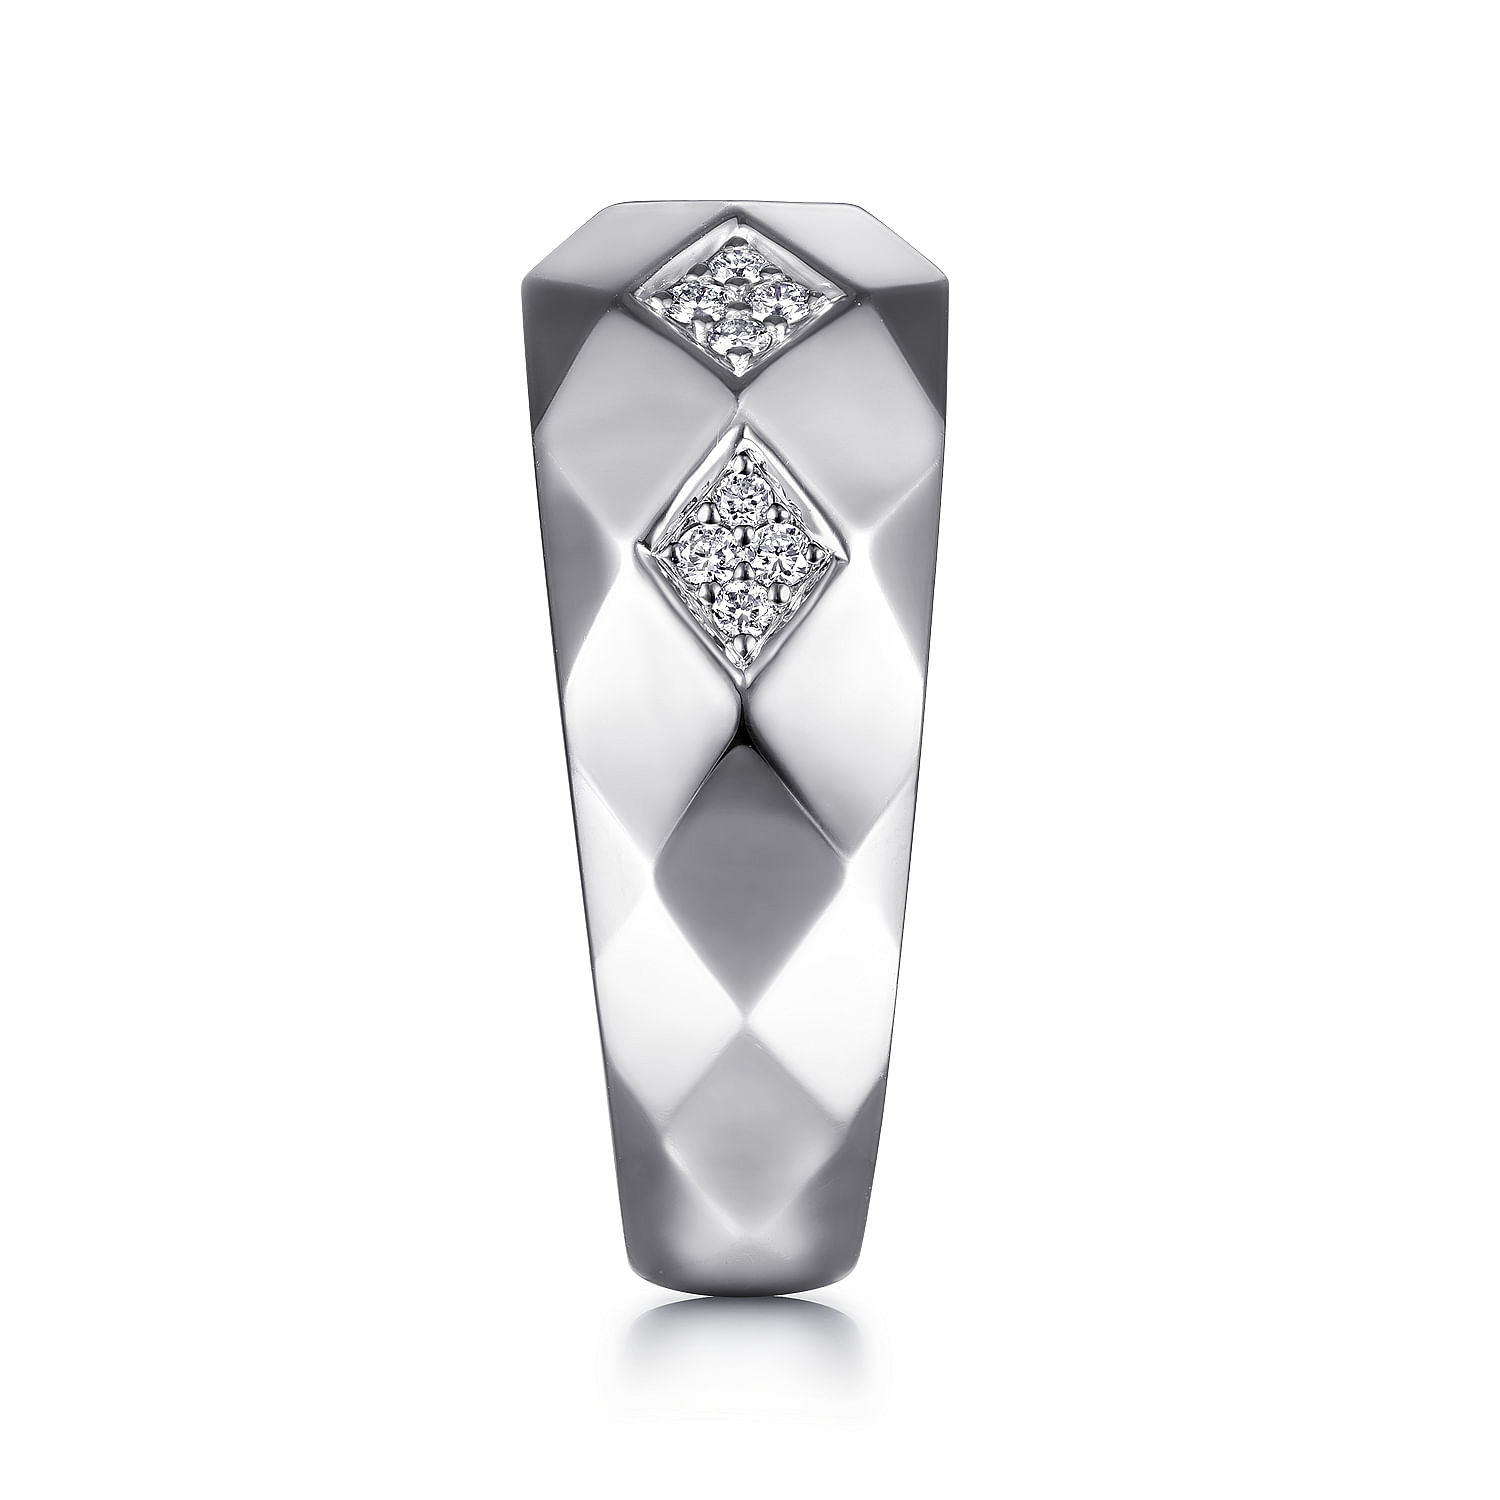 925 Sterling Silver Faceted Diamond Ring in High Polished Finish